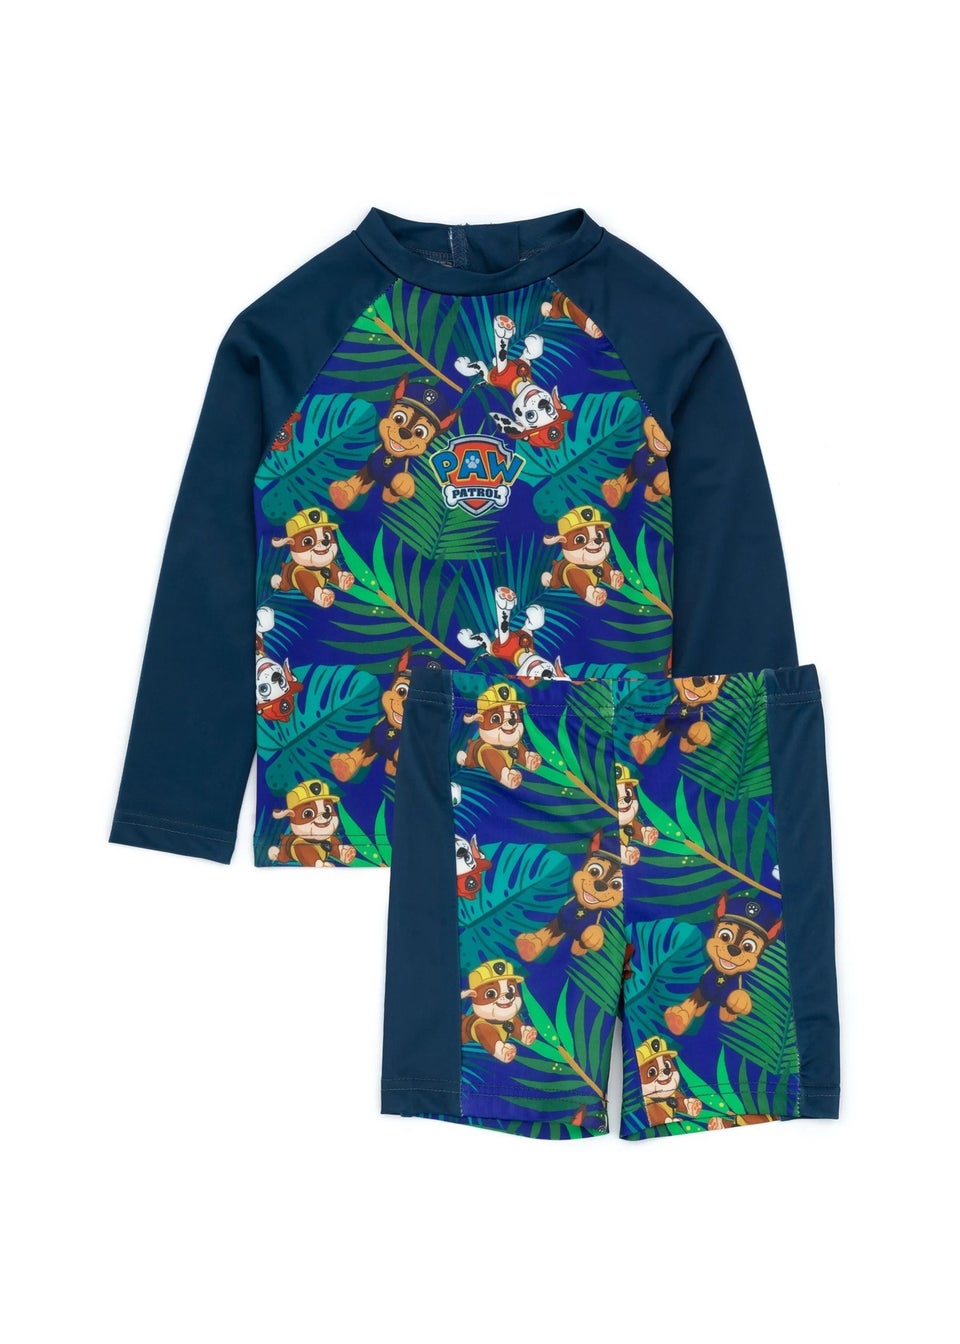 Paw Patrol Kids Navy Character Two-Piece Swimsuit (18months-7yrs)